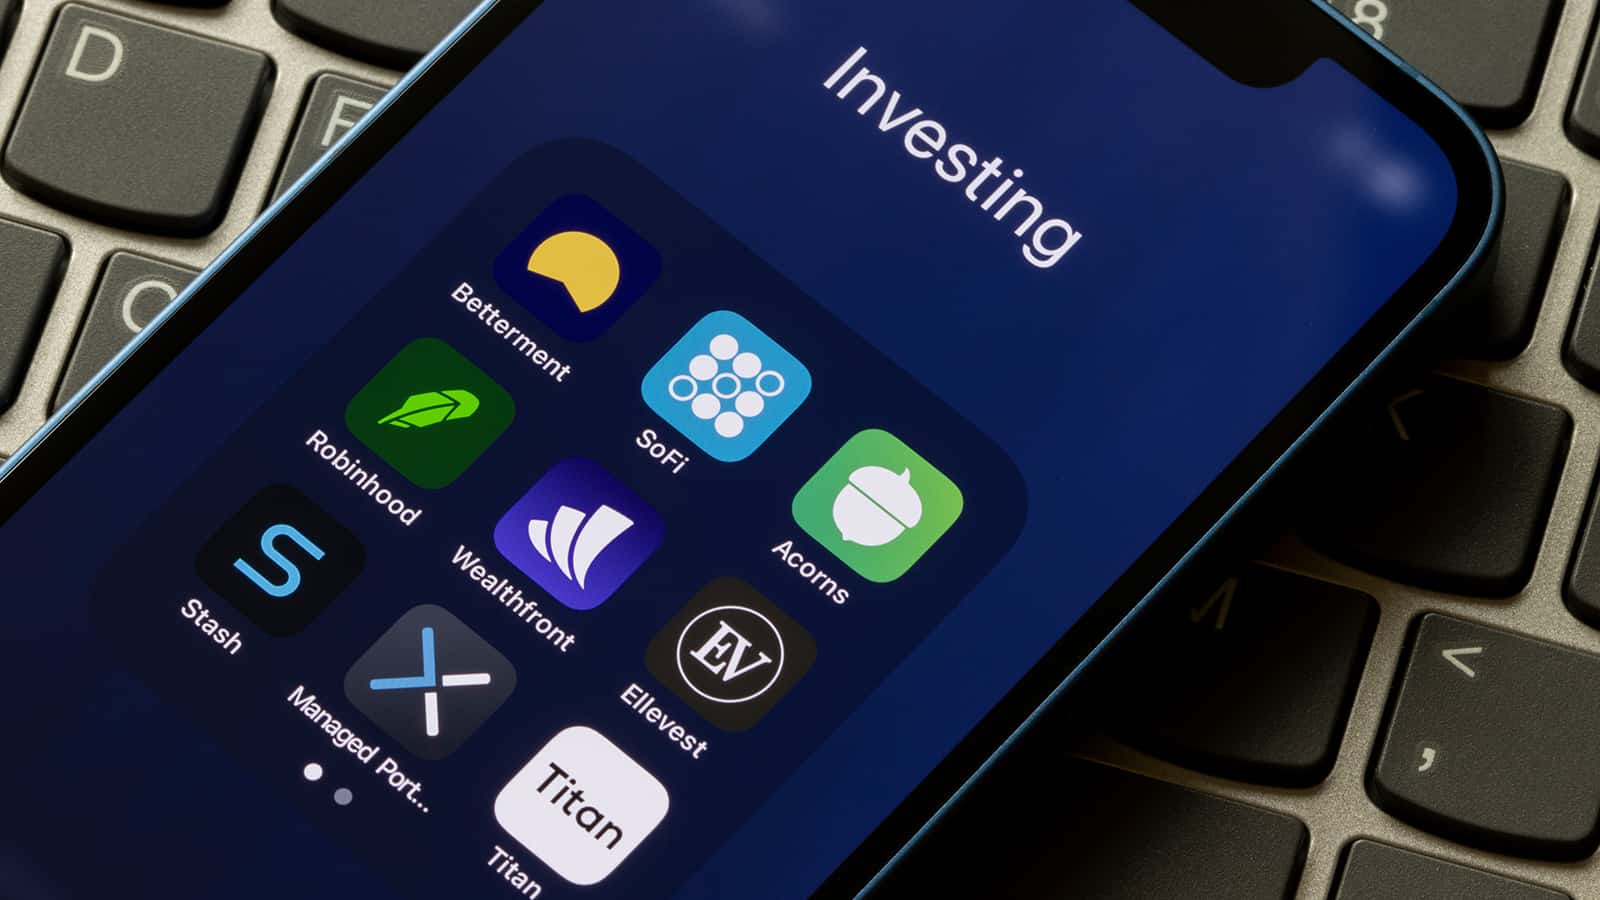 money investing app icons in a phone screen